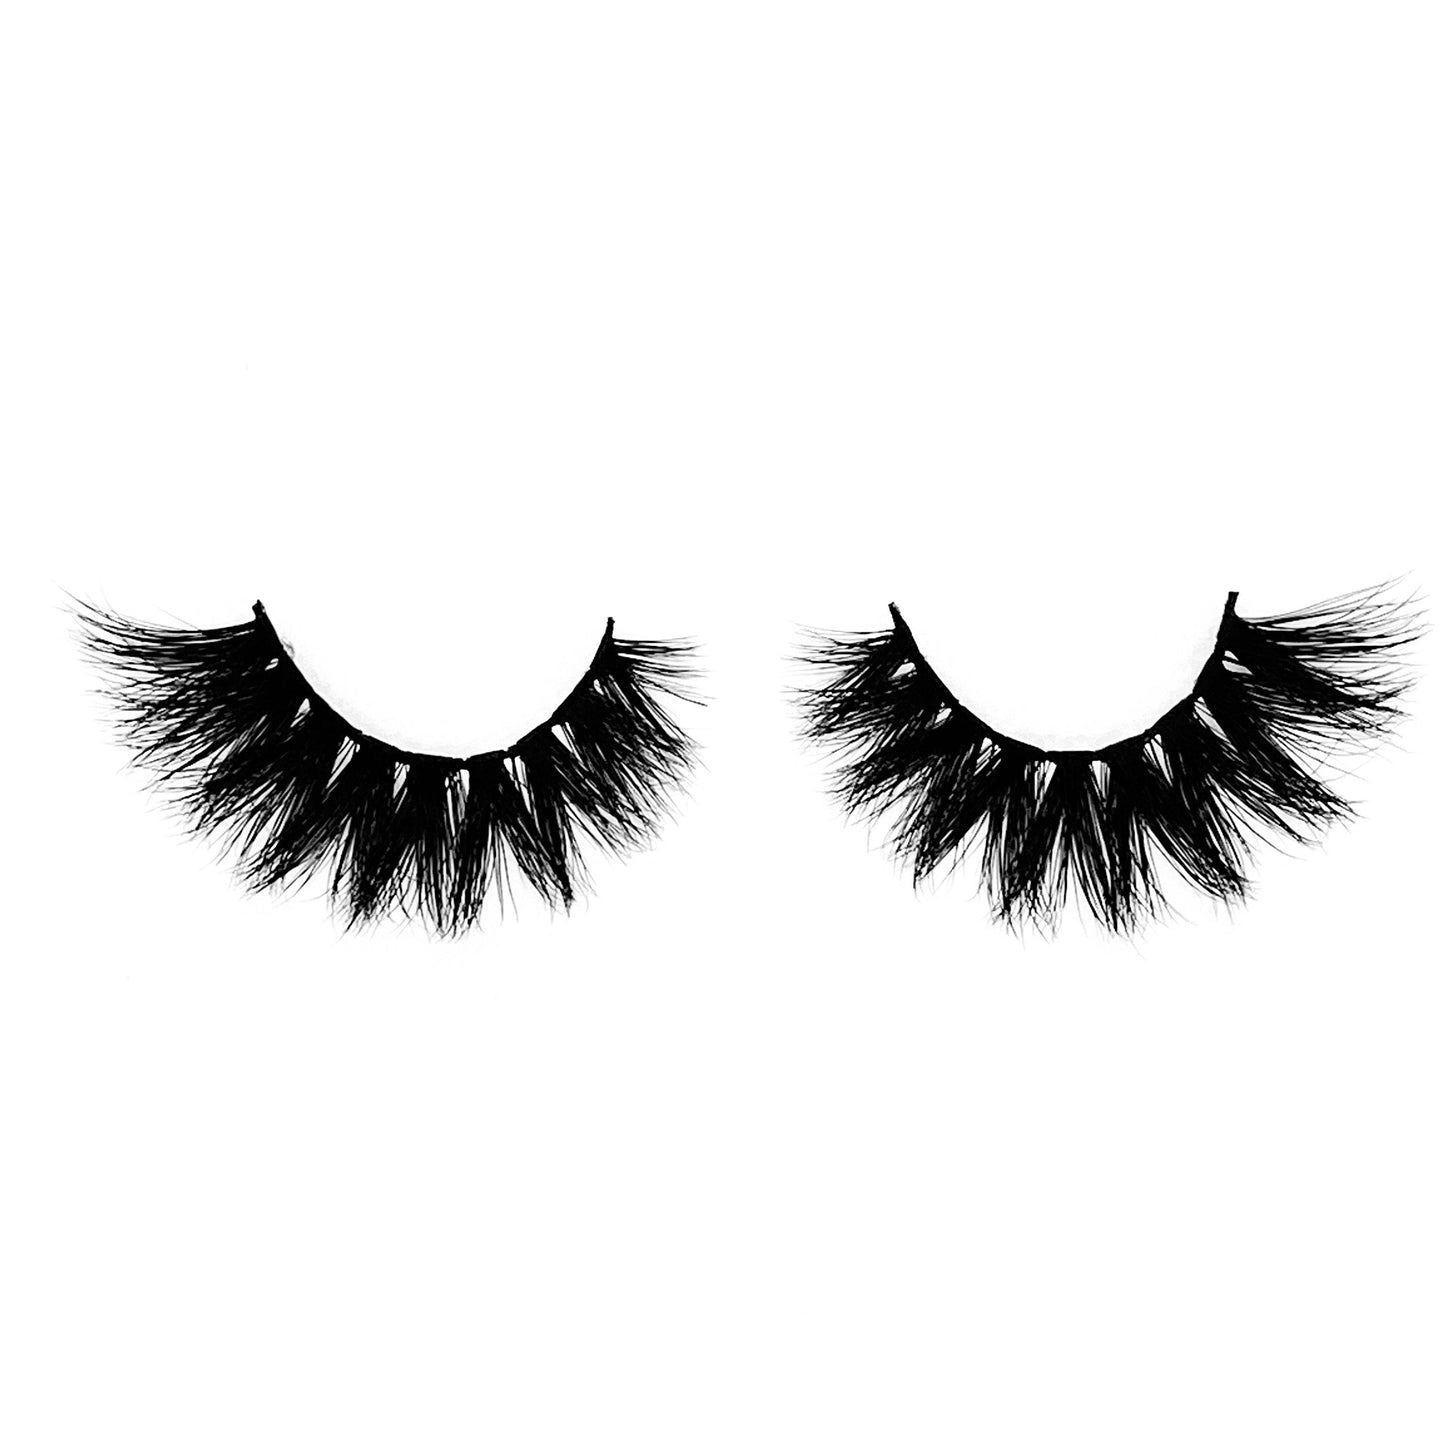 Finesser-High Volume-You're guaranteed to get away with anything in our full and fluffy "Finesser" lashes. "Finesser" is longer on the outer corners, giving you a fierce cat-eye look. These lashes serve extra glam for our ladies that love a sexy, wispy, dramatic look! Also available in our "Boss Up (3-Pack)." Try our "Amour" lashes for a shorter look! Description Handmade, Cruelty-Free, Wear up to 30x Material: 100% Mink Band: Thin, Black Cotton Band Volume: High Style: Dramatic, Long, Wispy, Ca